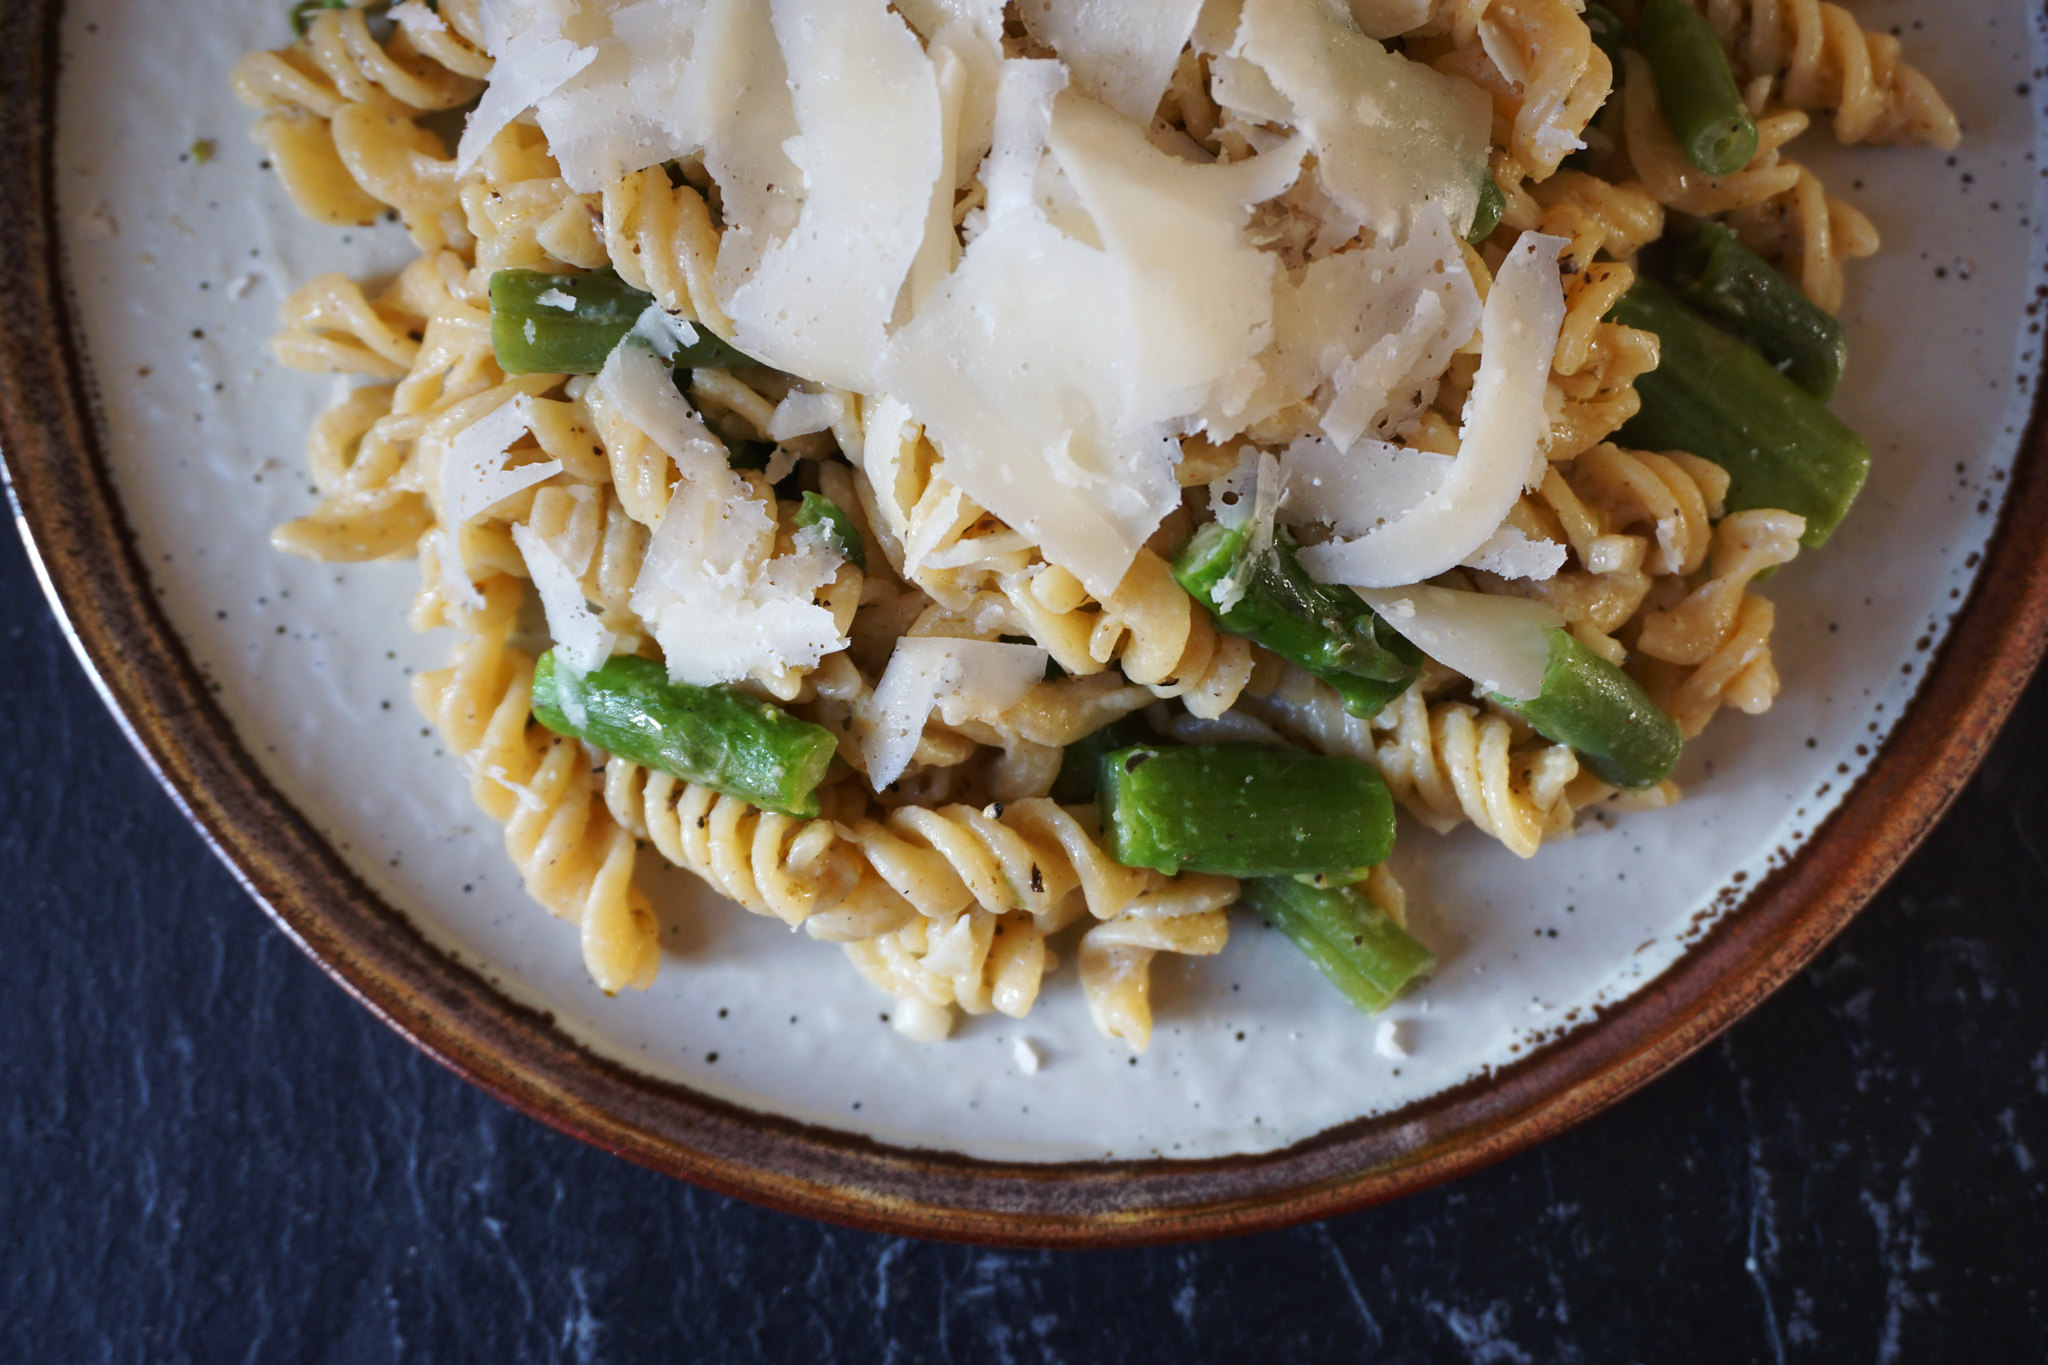 Gluten free asparagus, green beans and parmesan pasta made with Sainsbury's gluten free fusilli - gluten free asparagus parmesan pasta